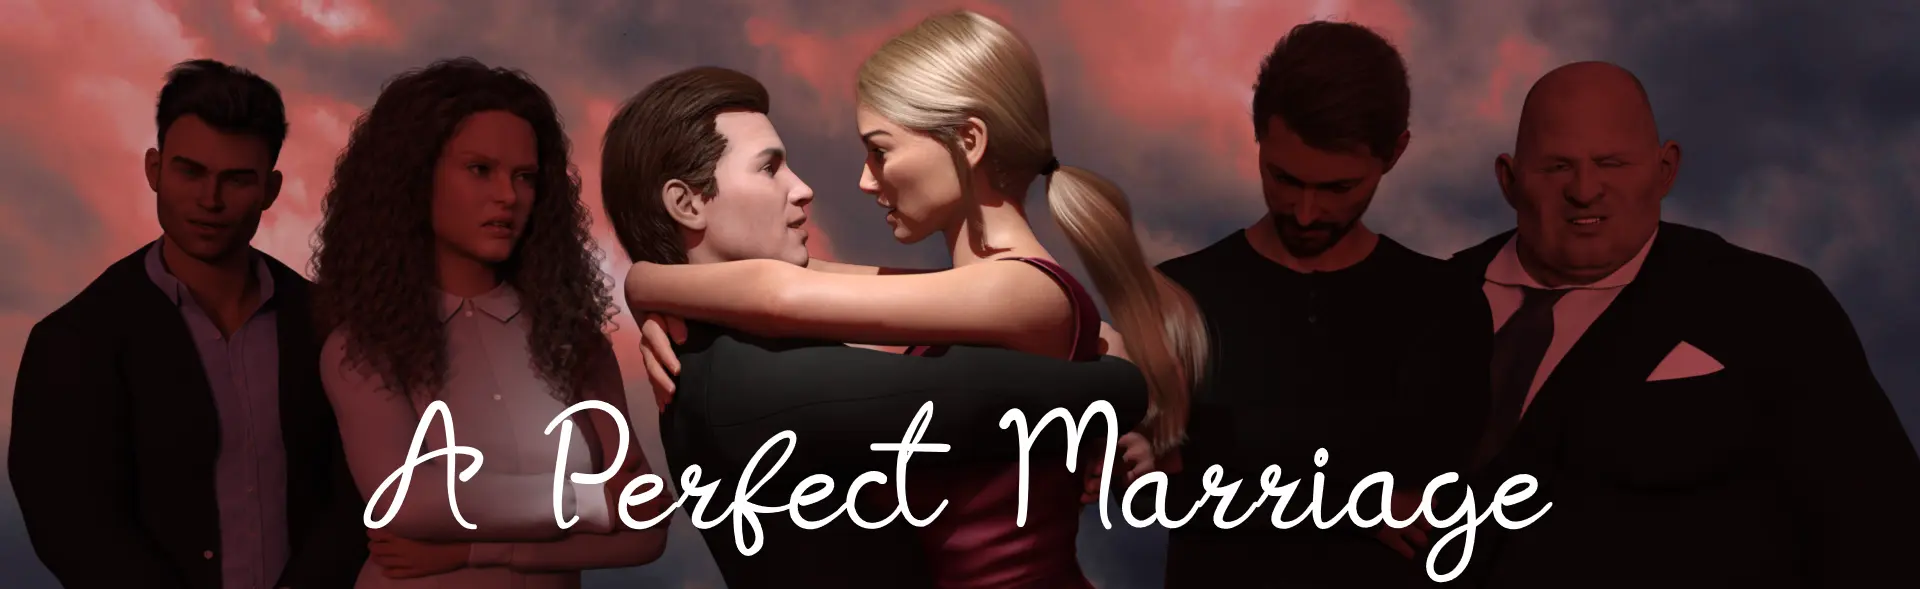 A Perfect Marriage [v1.0] main image